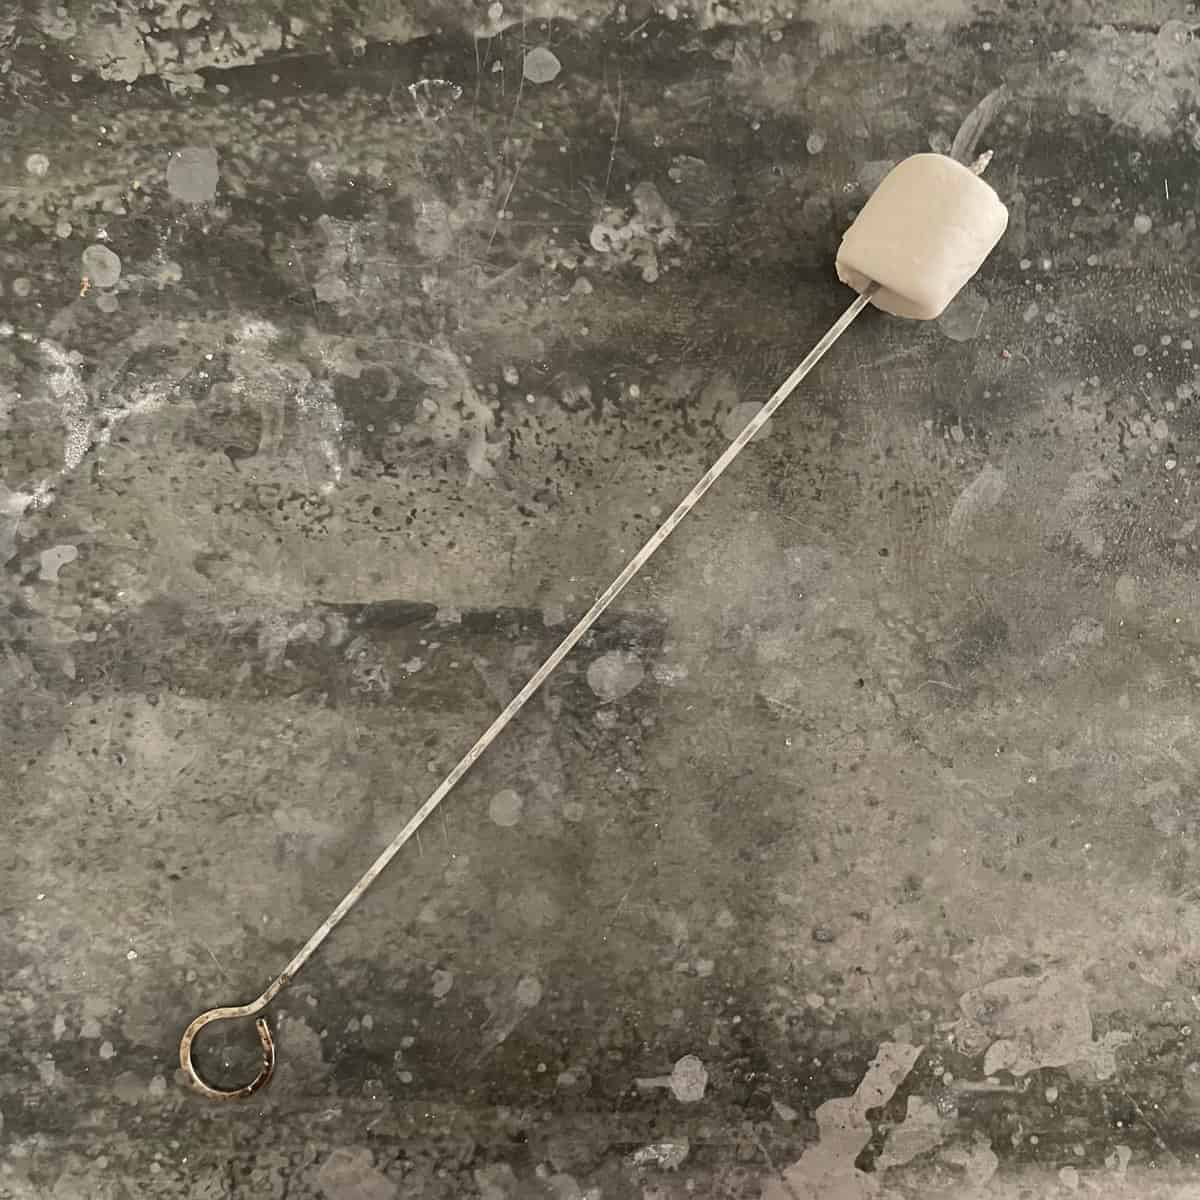 marshmallow on a metal skewer on a metal background.